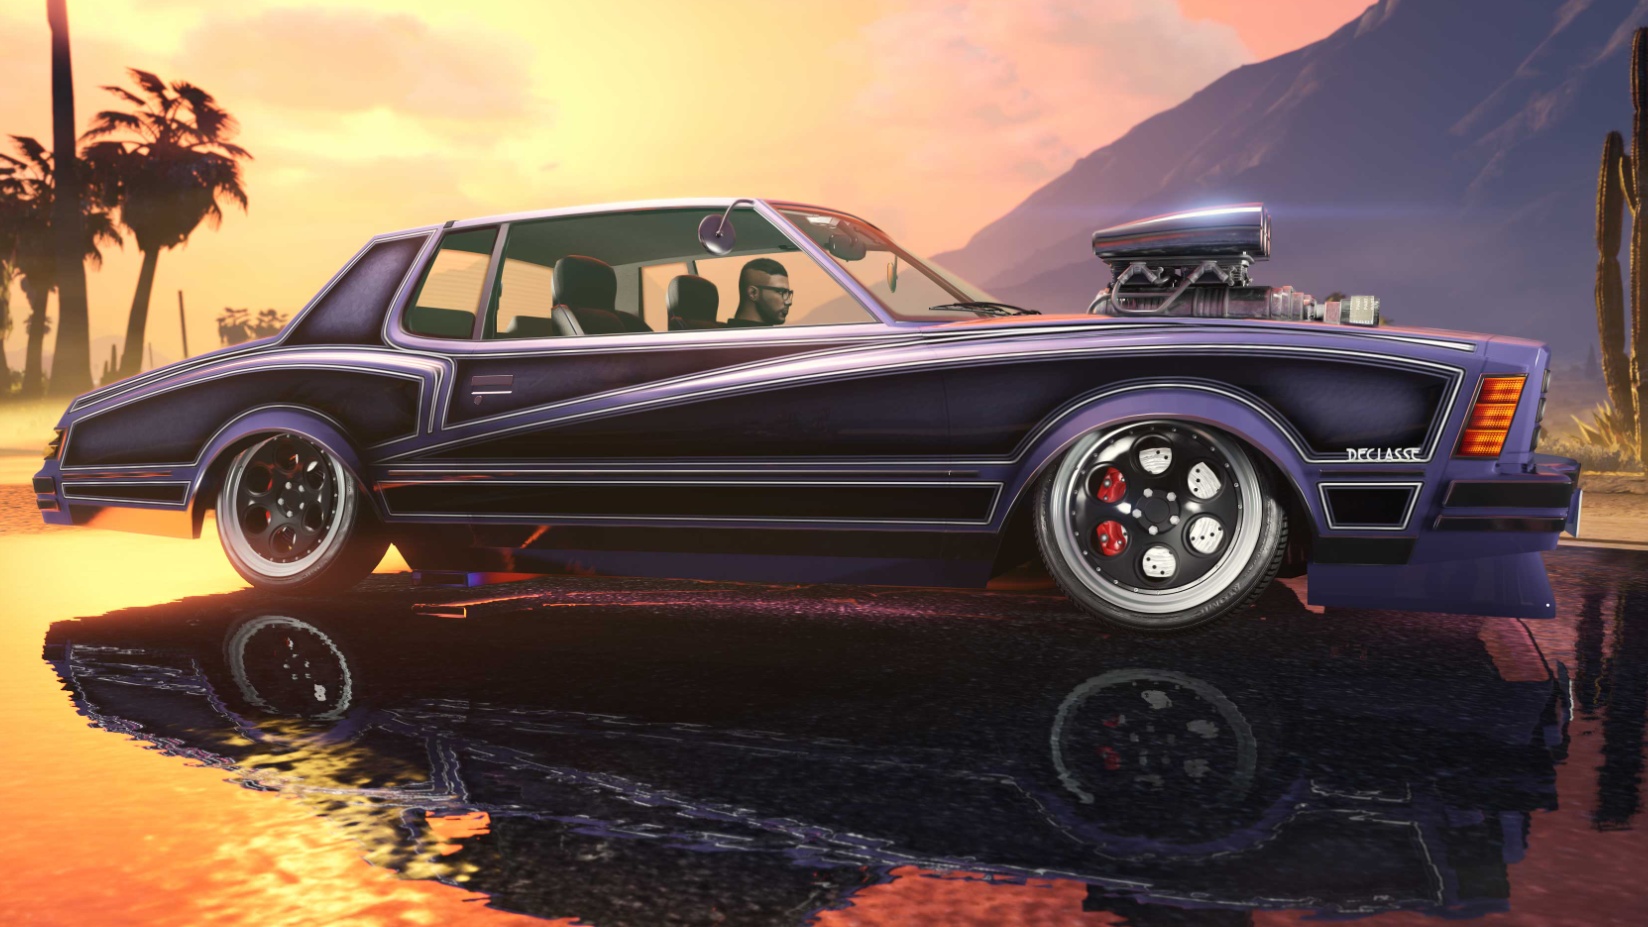 (The new Declasse Tahoma Coupe will be given to all GTA Online players with the Winter Update 2022)